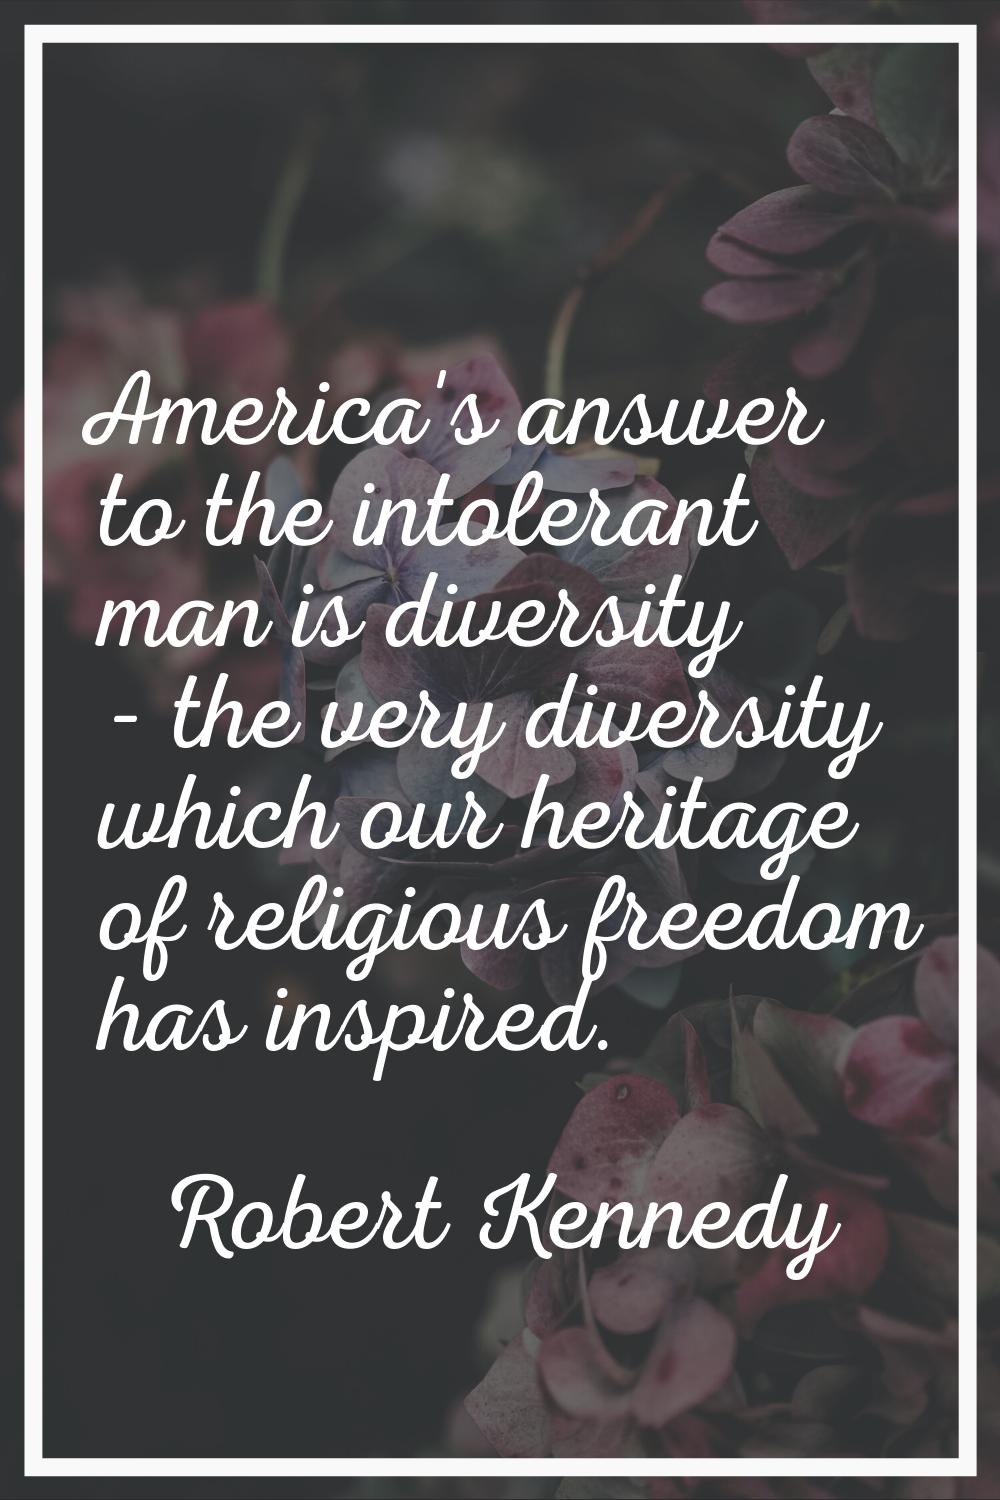 America's answer to the intolerant man is diversity - the very diversity which our heritage of reli